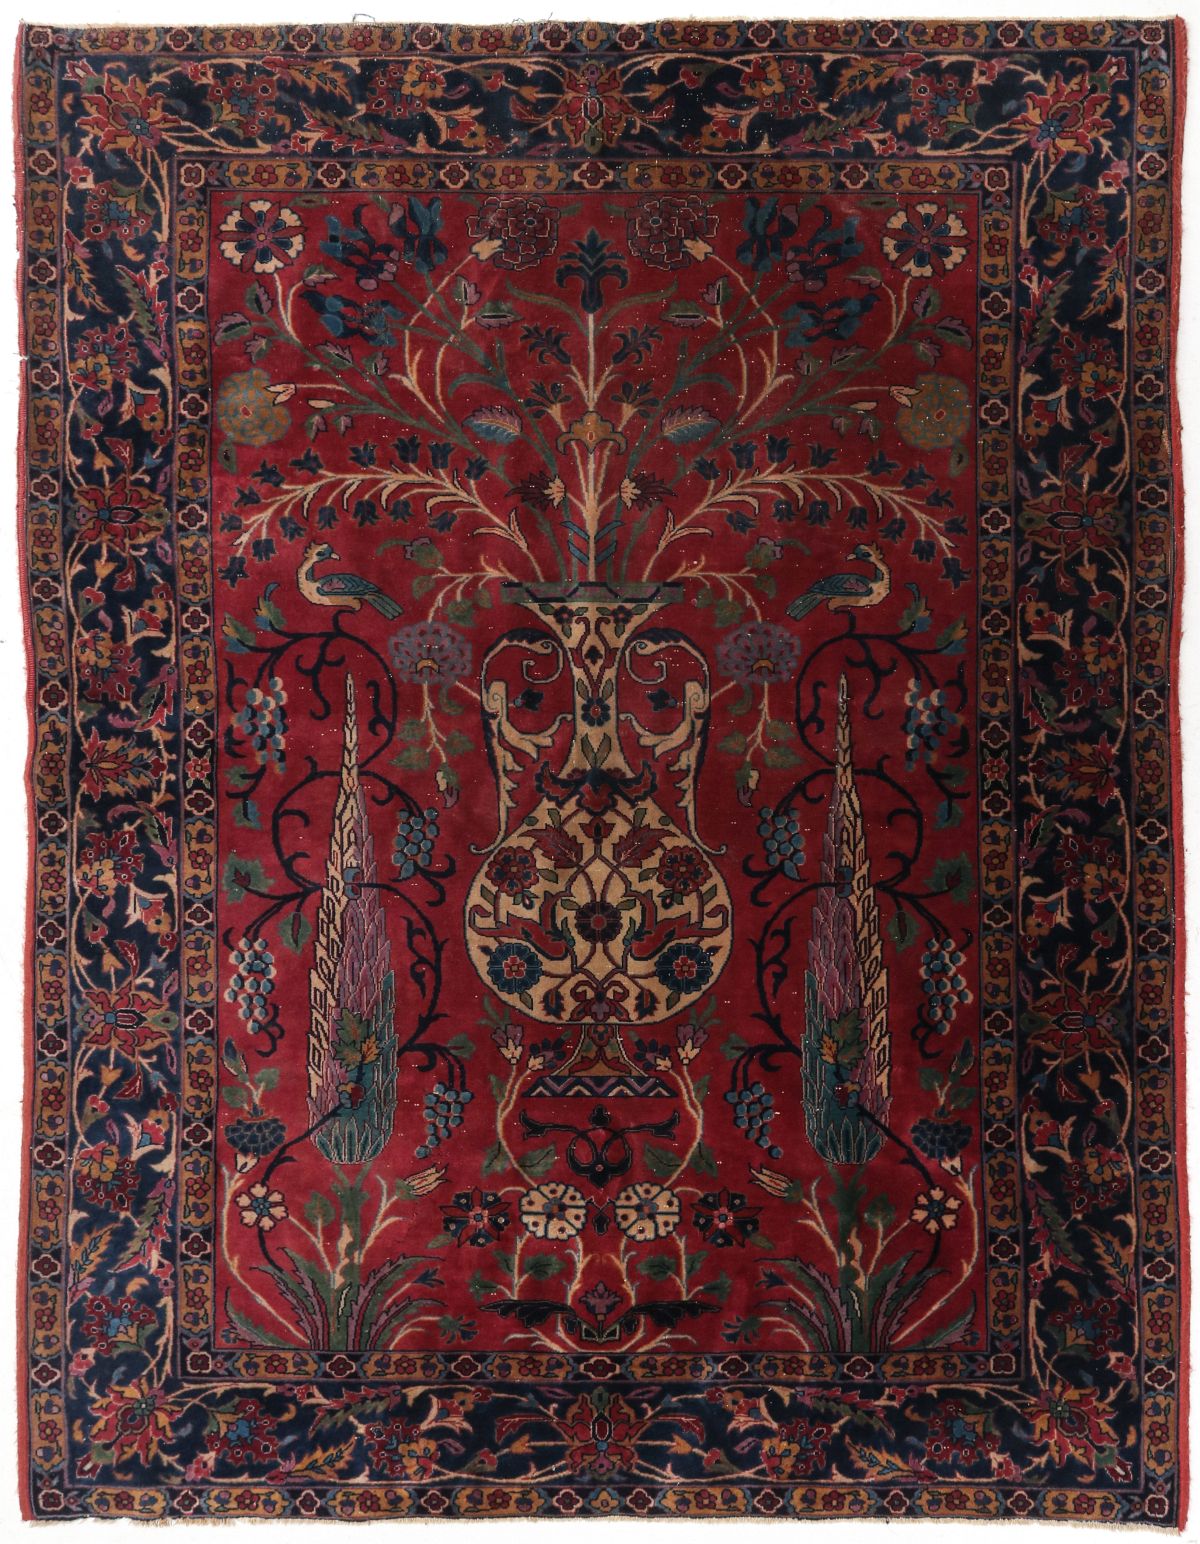 AN EARLY TO MID 20TH C. PERSIAN KIRMAN VASE RUG